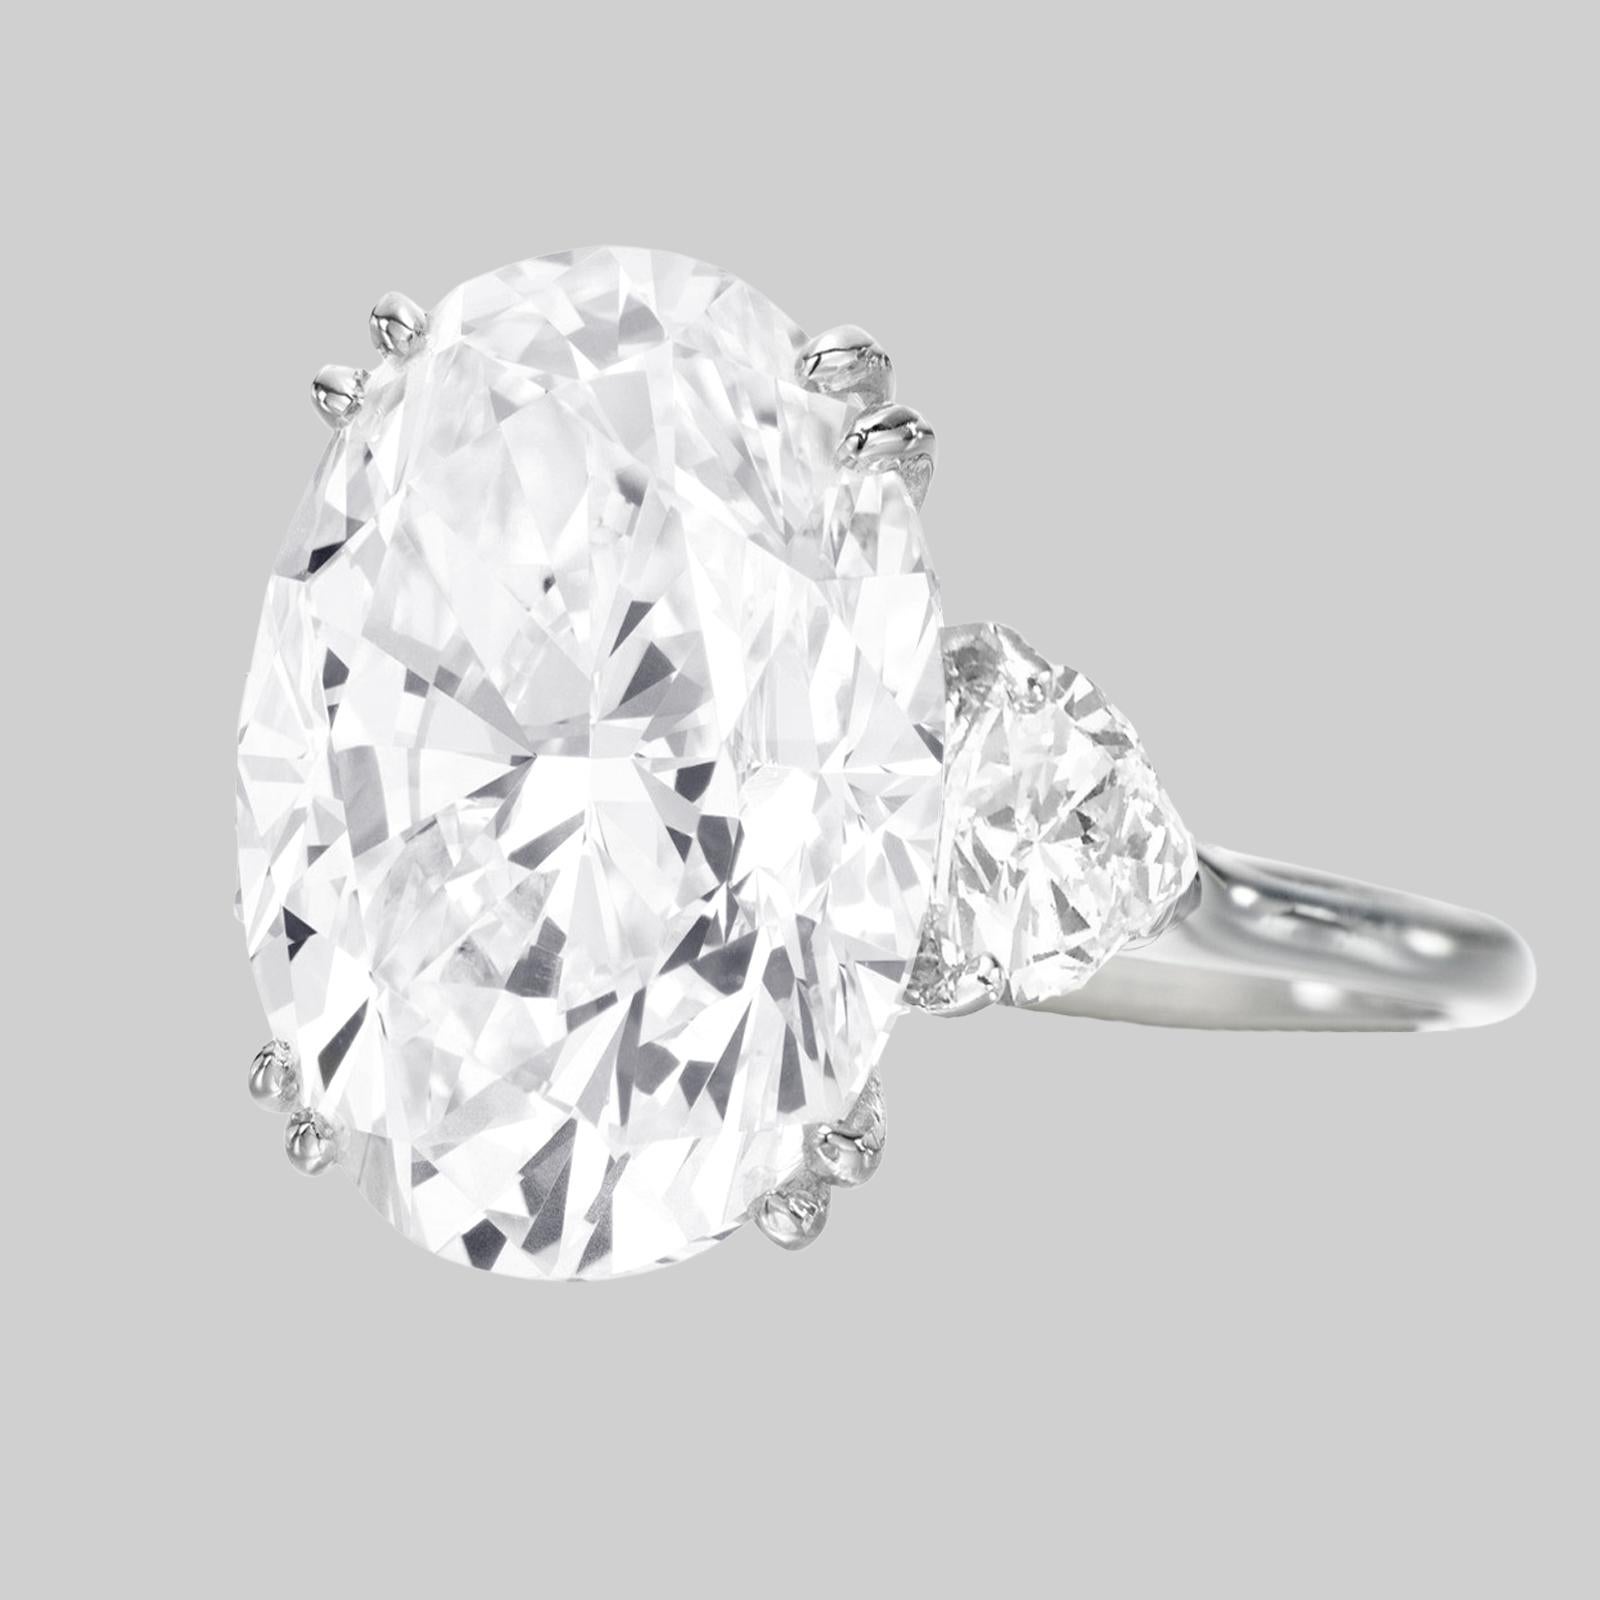 An exquisite 18.88 carat Type IIa diamond ring with an impressive lenght.

Take a look at the video 

This diamonds are regularly knocking down auction records.  Gems of this type are often called “Golconda” diamonds after the famous Indian mines